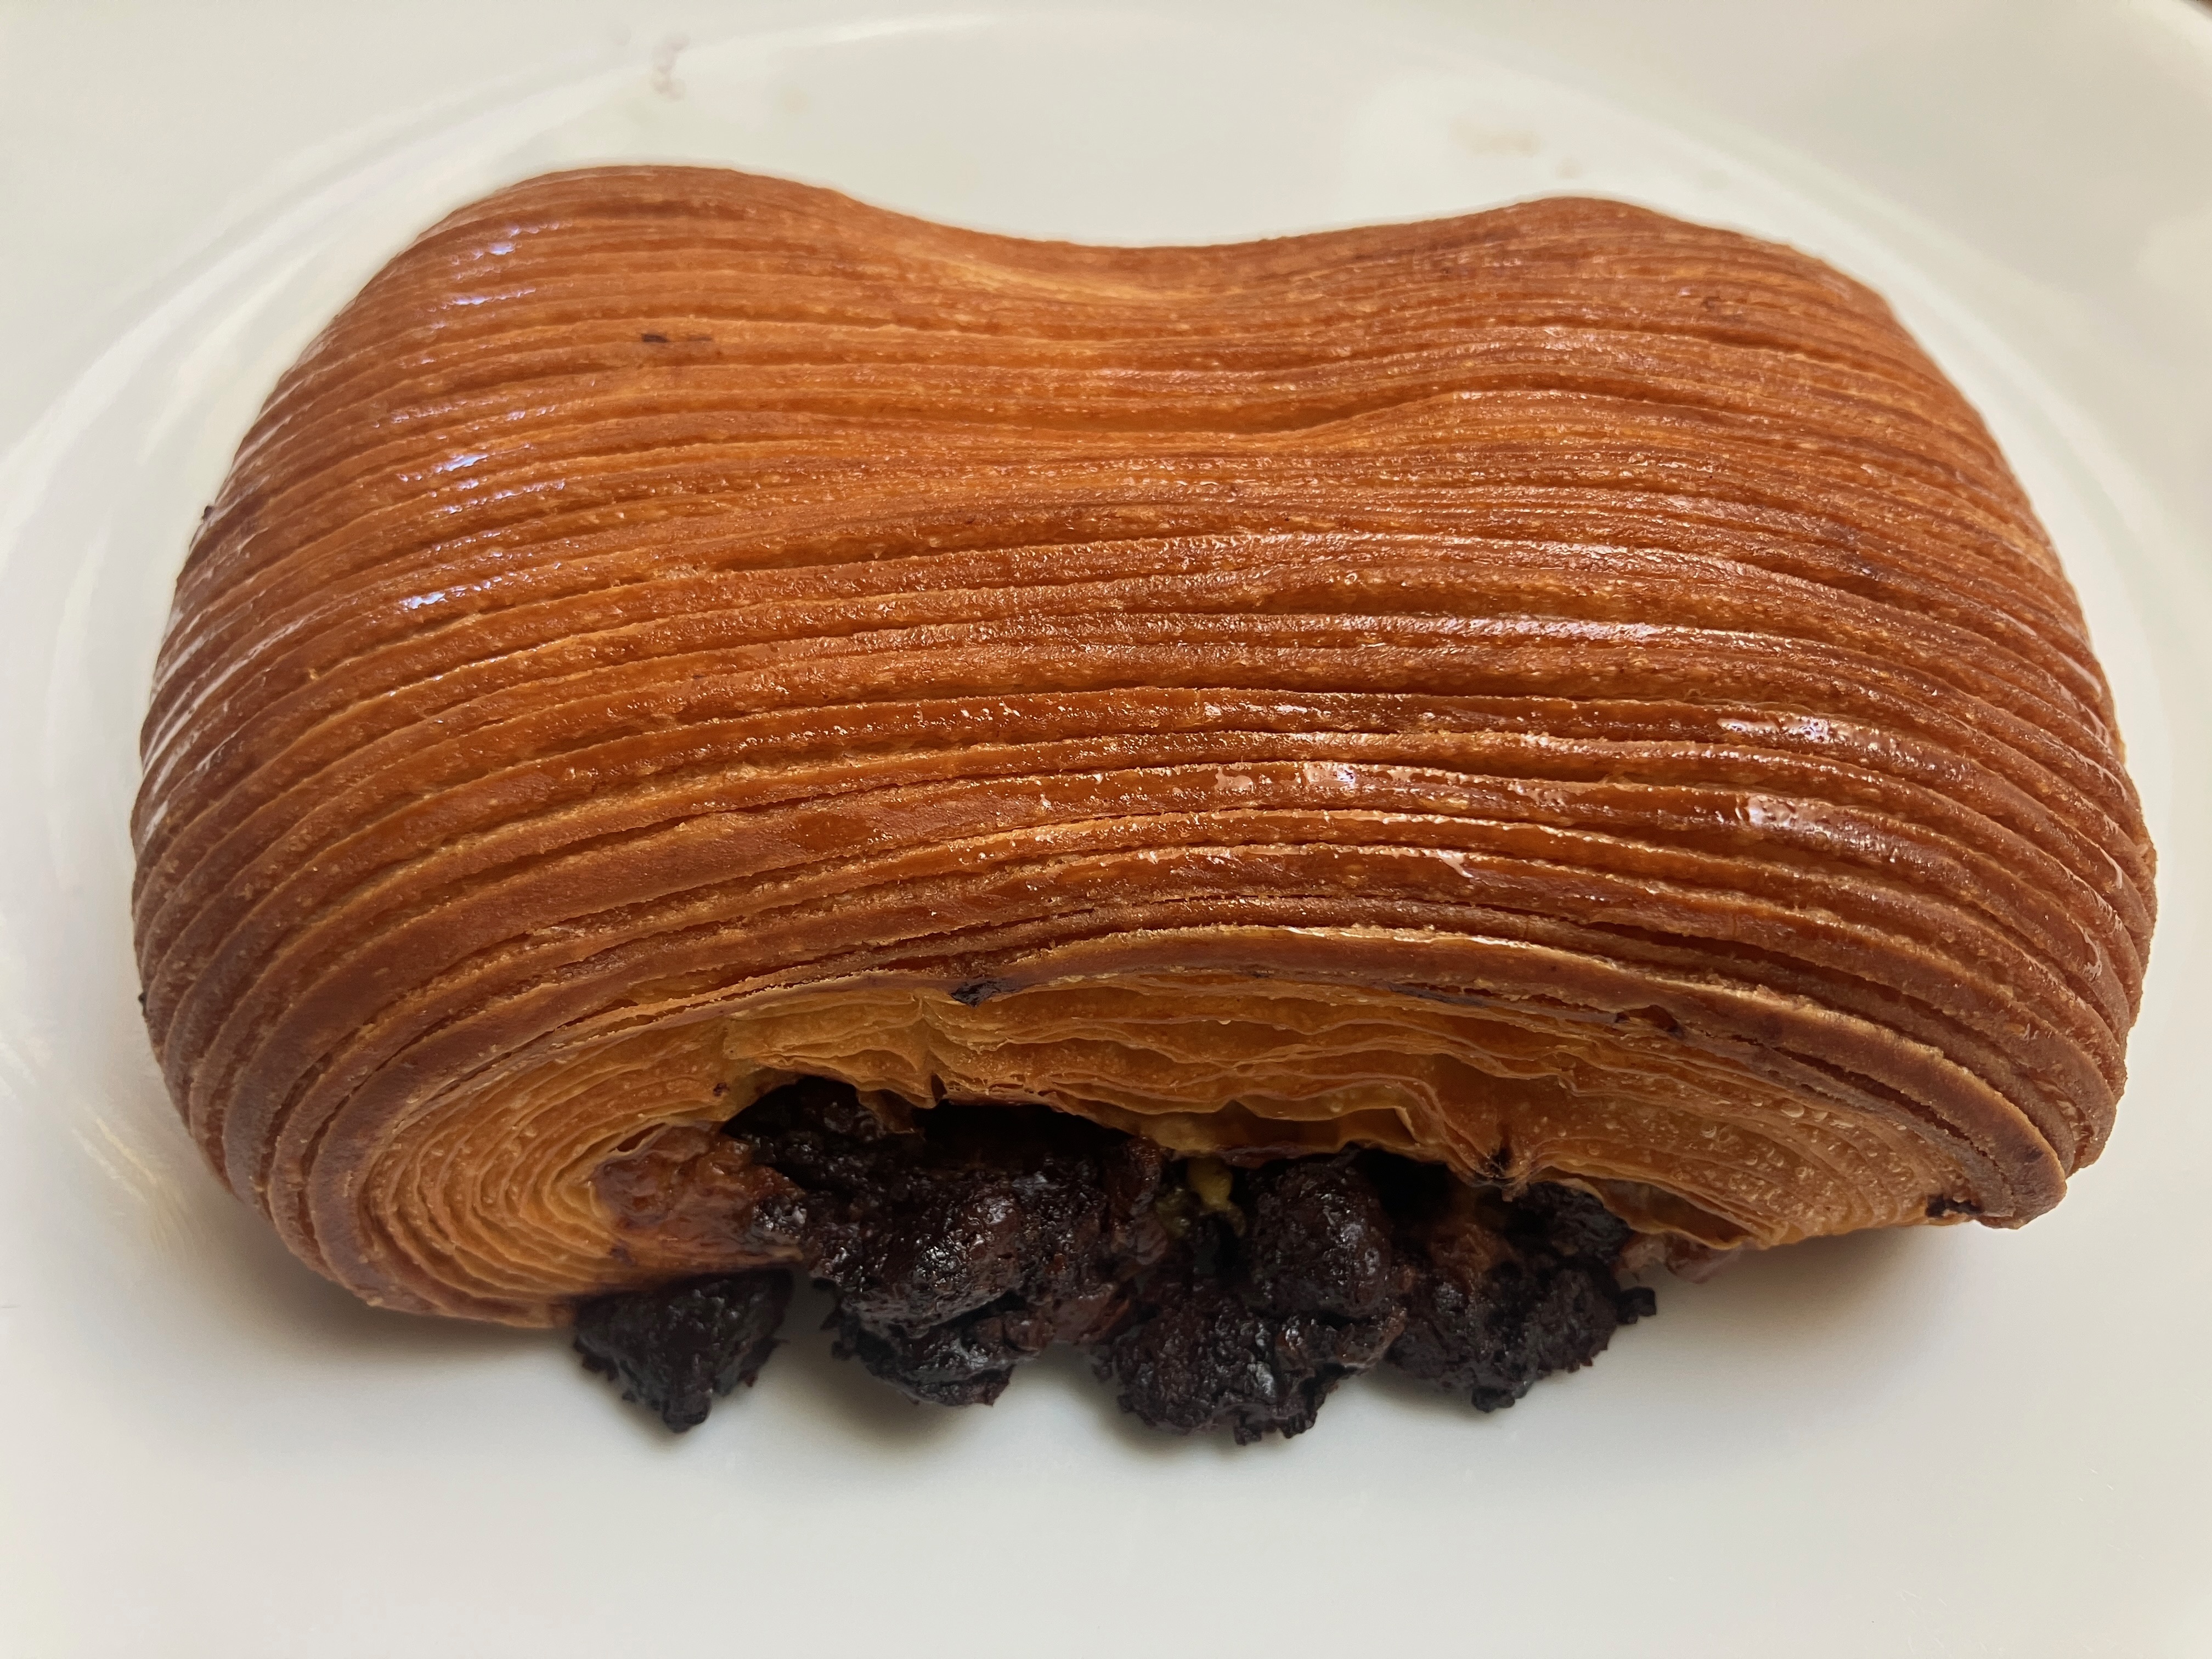 The pain Suisse from Maison Benoit in Danville is golden, flaky and full of chocolate and cream. (Kate Bradshaw/Bay Area News Group)